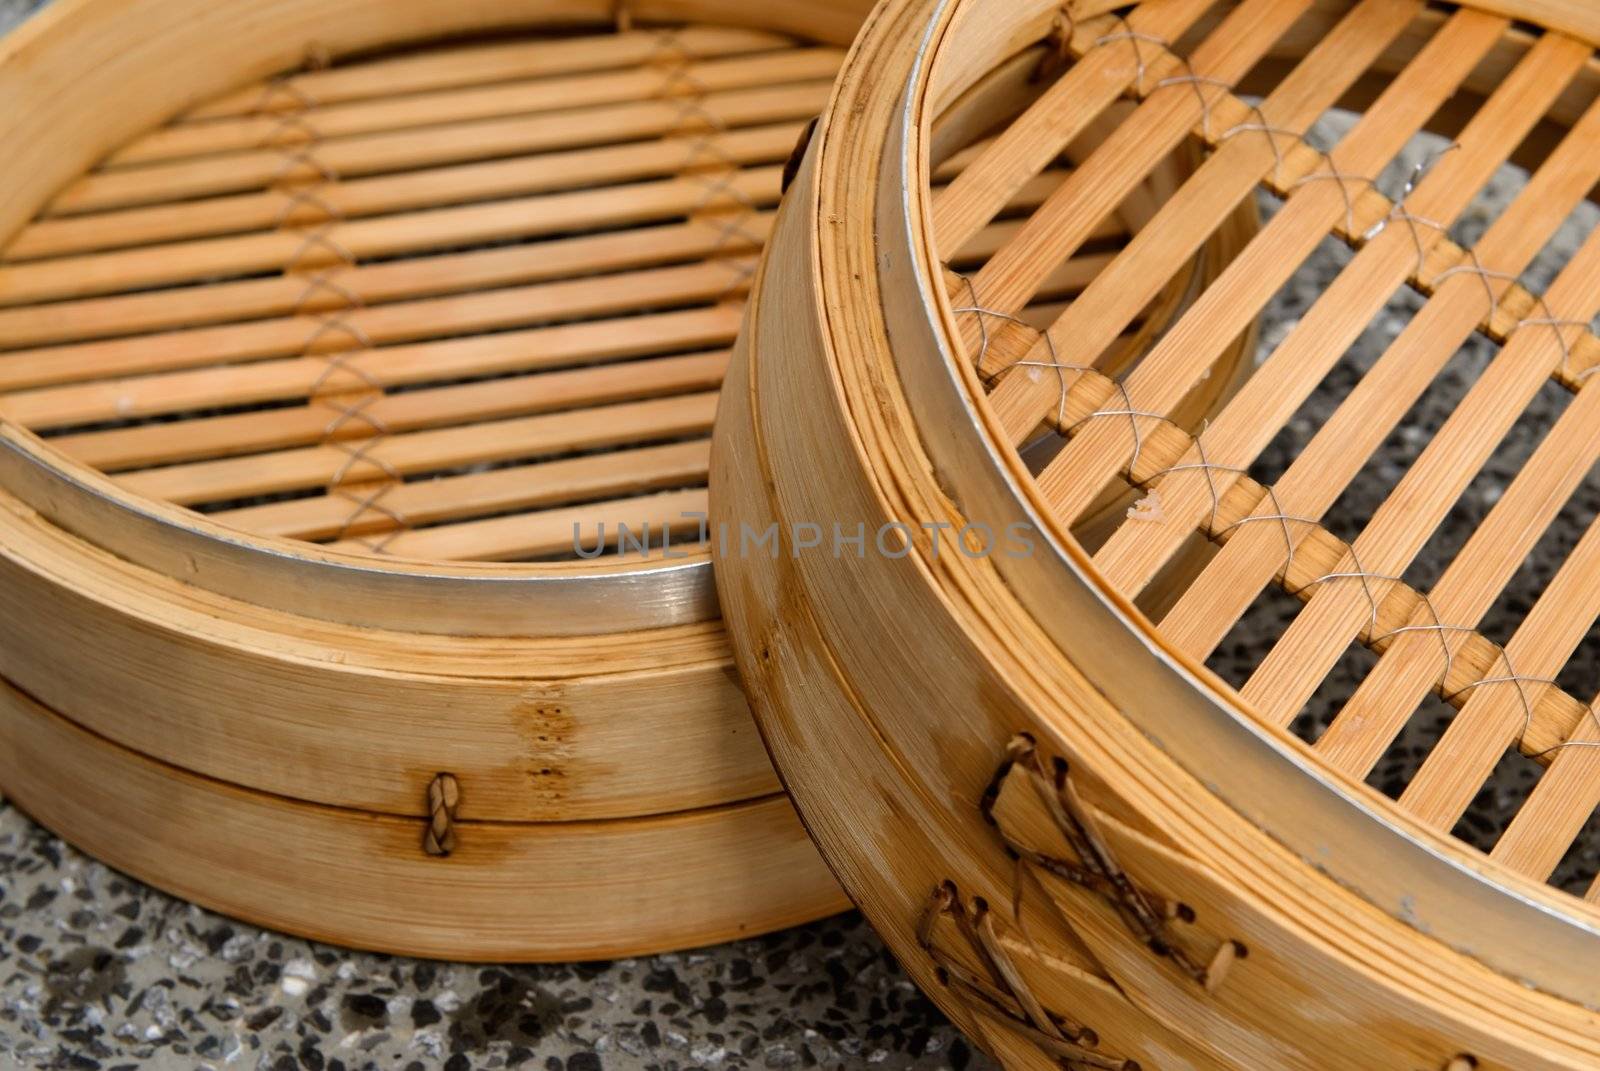 It is a chinese steamer made with bamboo.